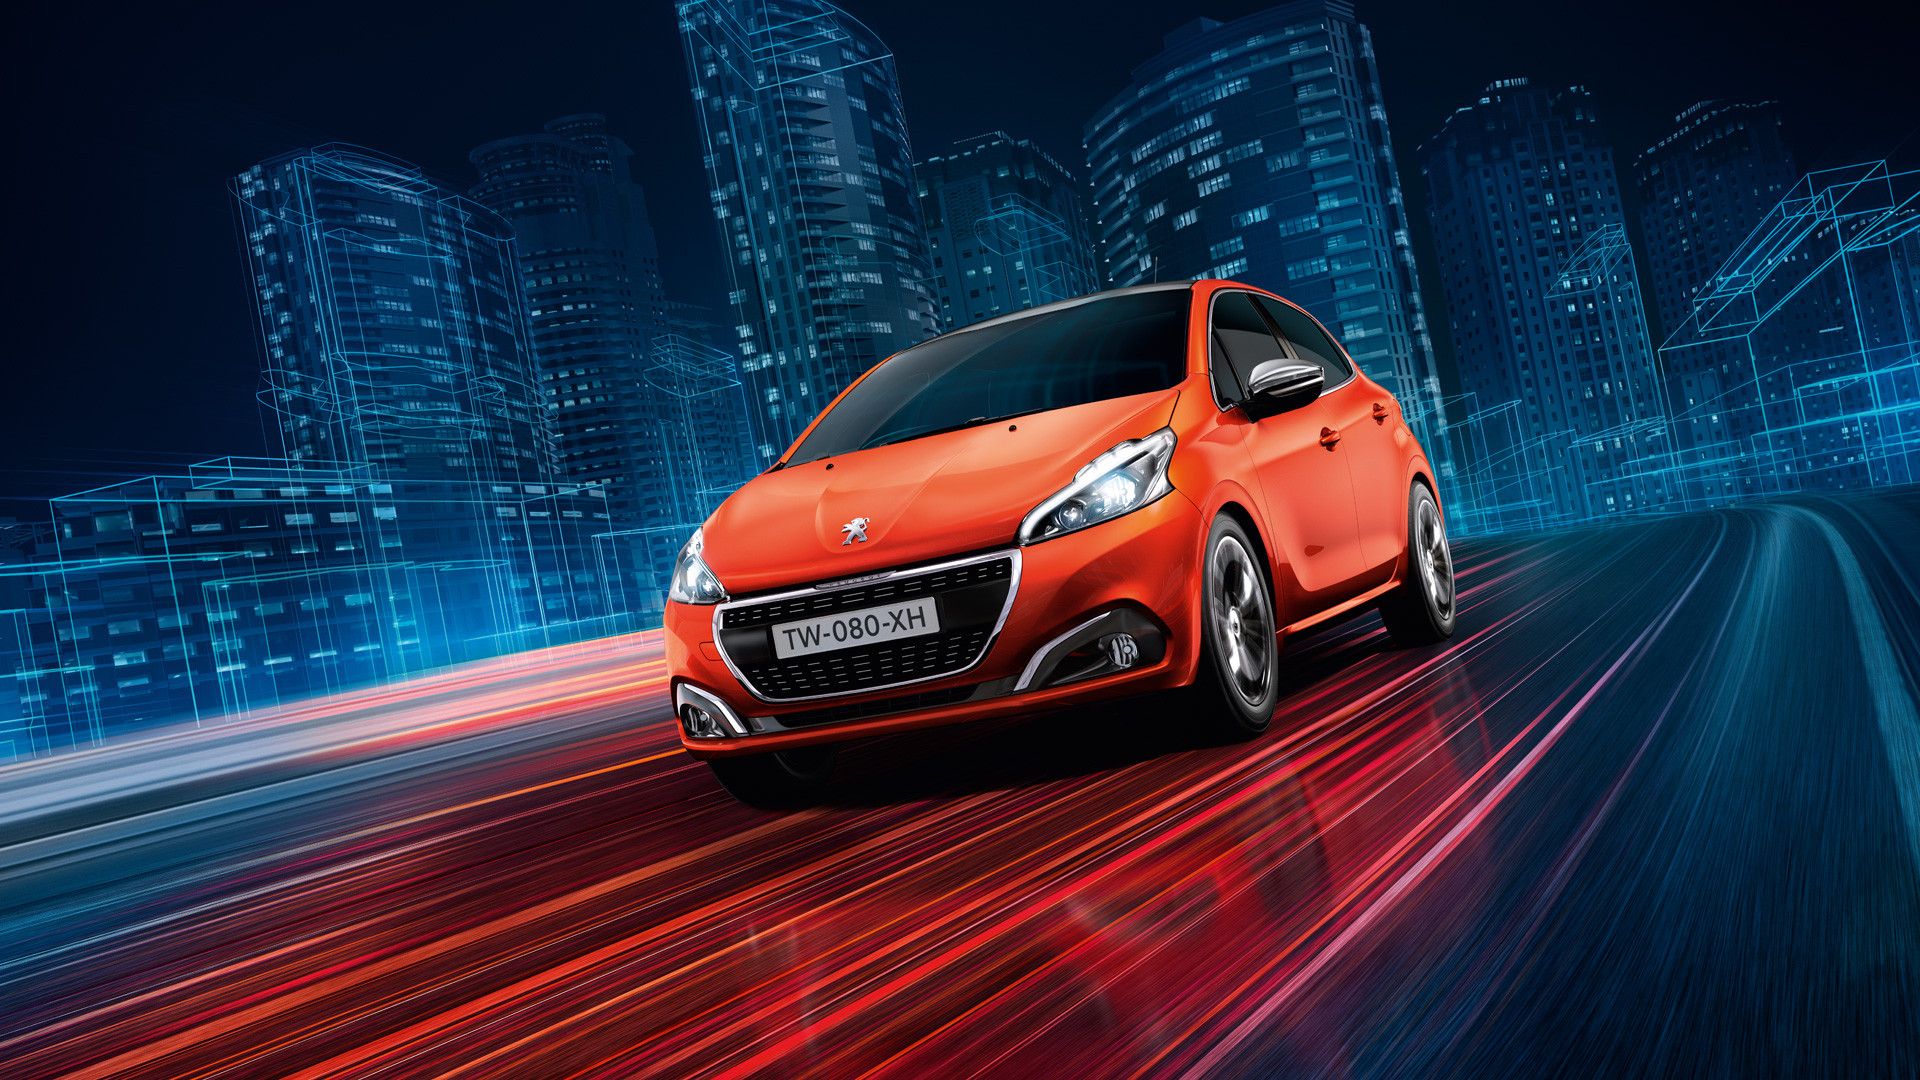 Free download PEUGEOT 208 New Car Showroom Small Car Test Drive Today [1920x1080] for your Desktop, Mobile & Tablet. Explore Peugeot 2008 2019 Wallpaper. Peugeot 2008 2019 Wallpaper, Peugeot 208 2019 Wallpaper, Peugeot 308 Wallpaper